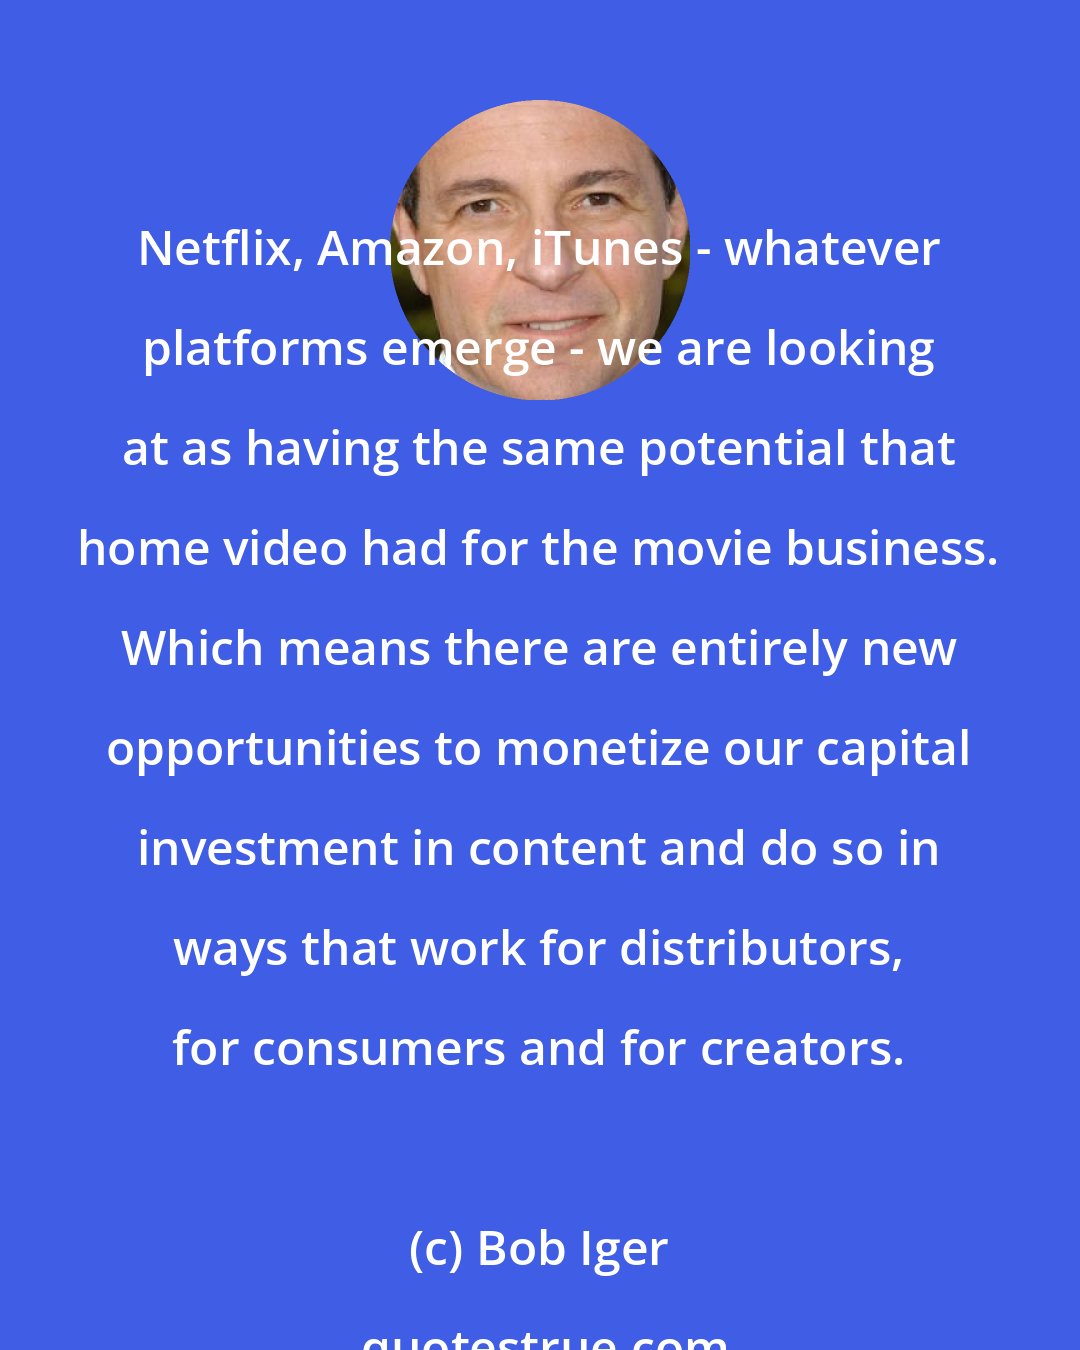 Bob Iger: Netflix, Amazon, iTunes - whatever platforms emerge - we are looking at as having the same potential that home video had for the movie business. Which means there are entirely new opportunities to monetize our capital investment in content and do so in ways that work for distributors, for consumers and for creators.